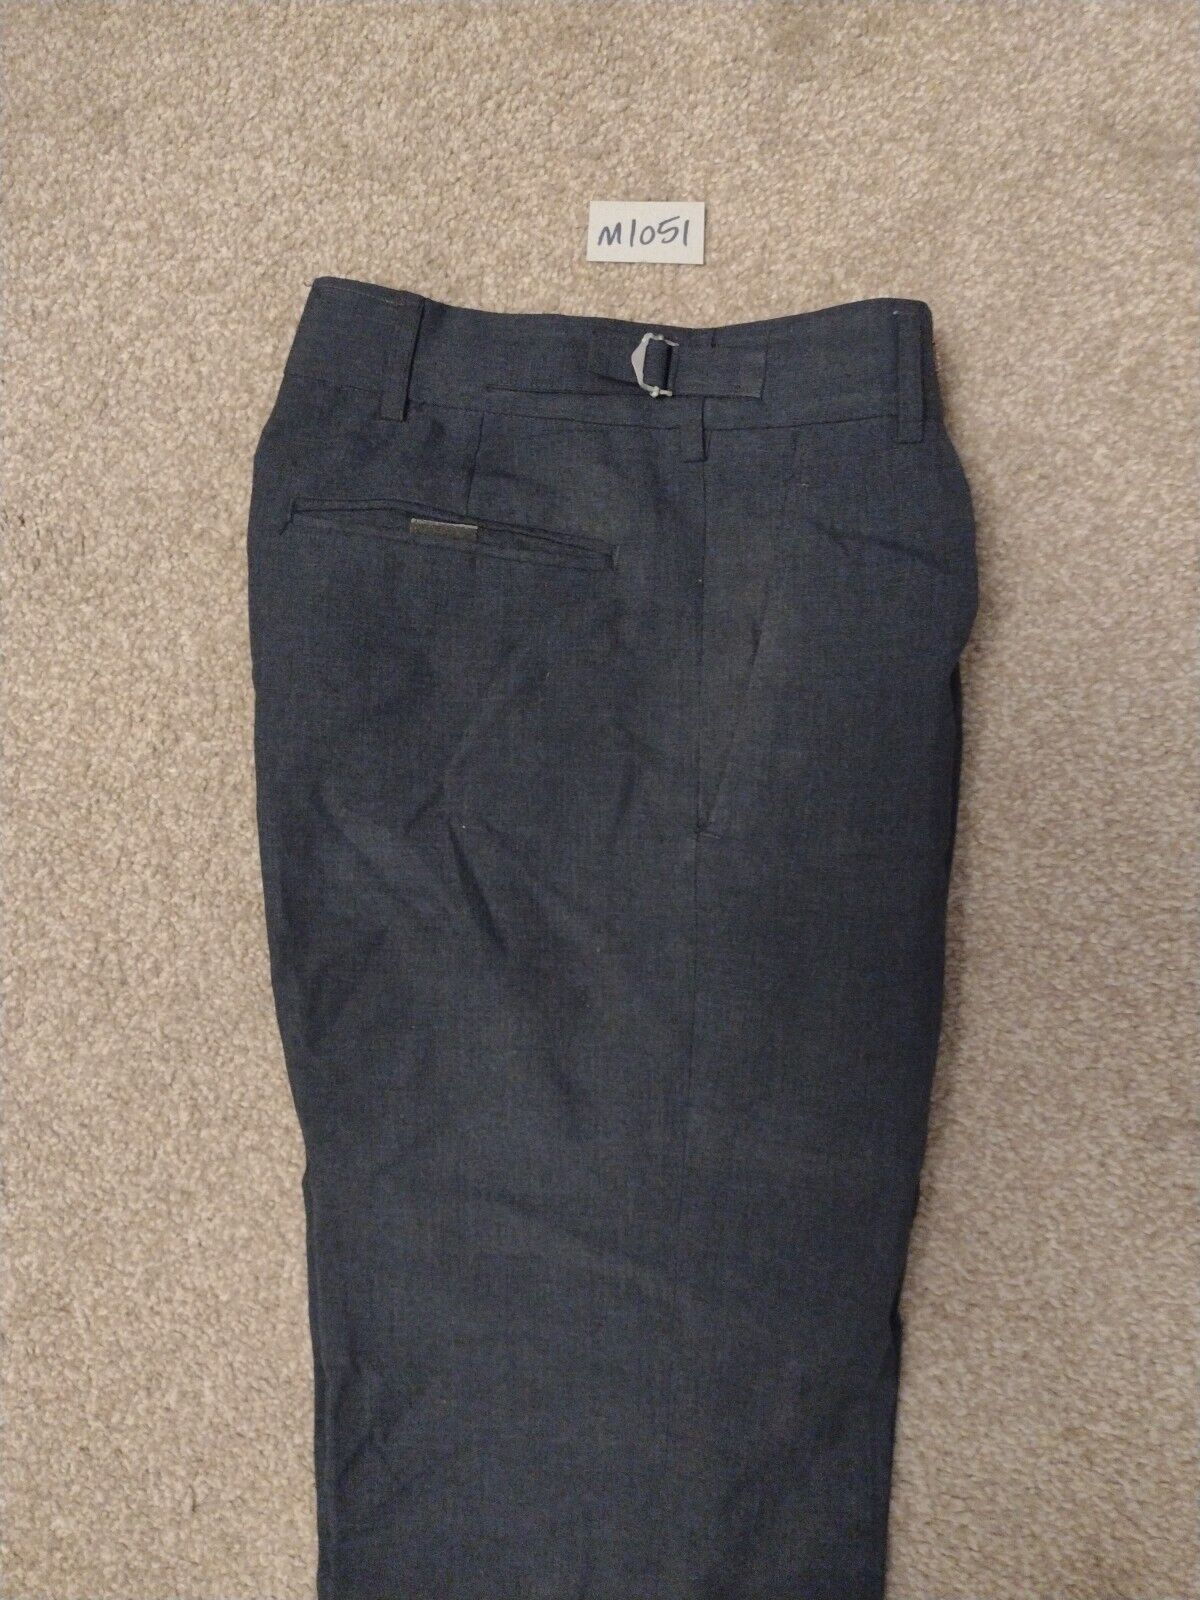 m1051 - A - British Military Issue RAF Royal Air Force Blue Grey Dress Trousers